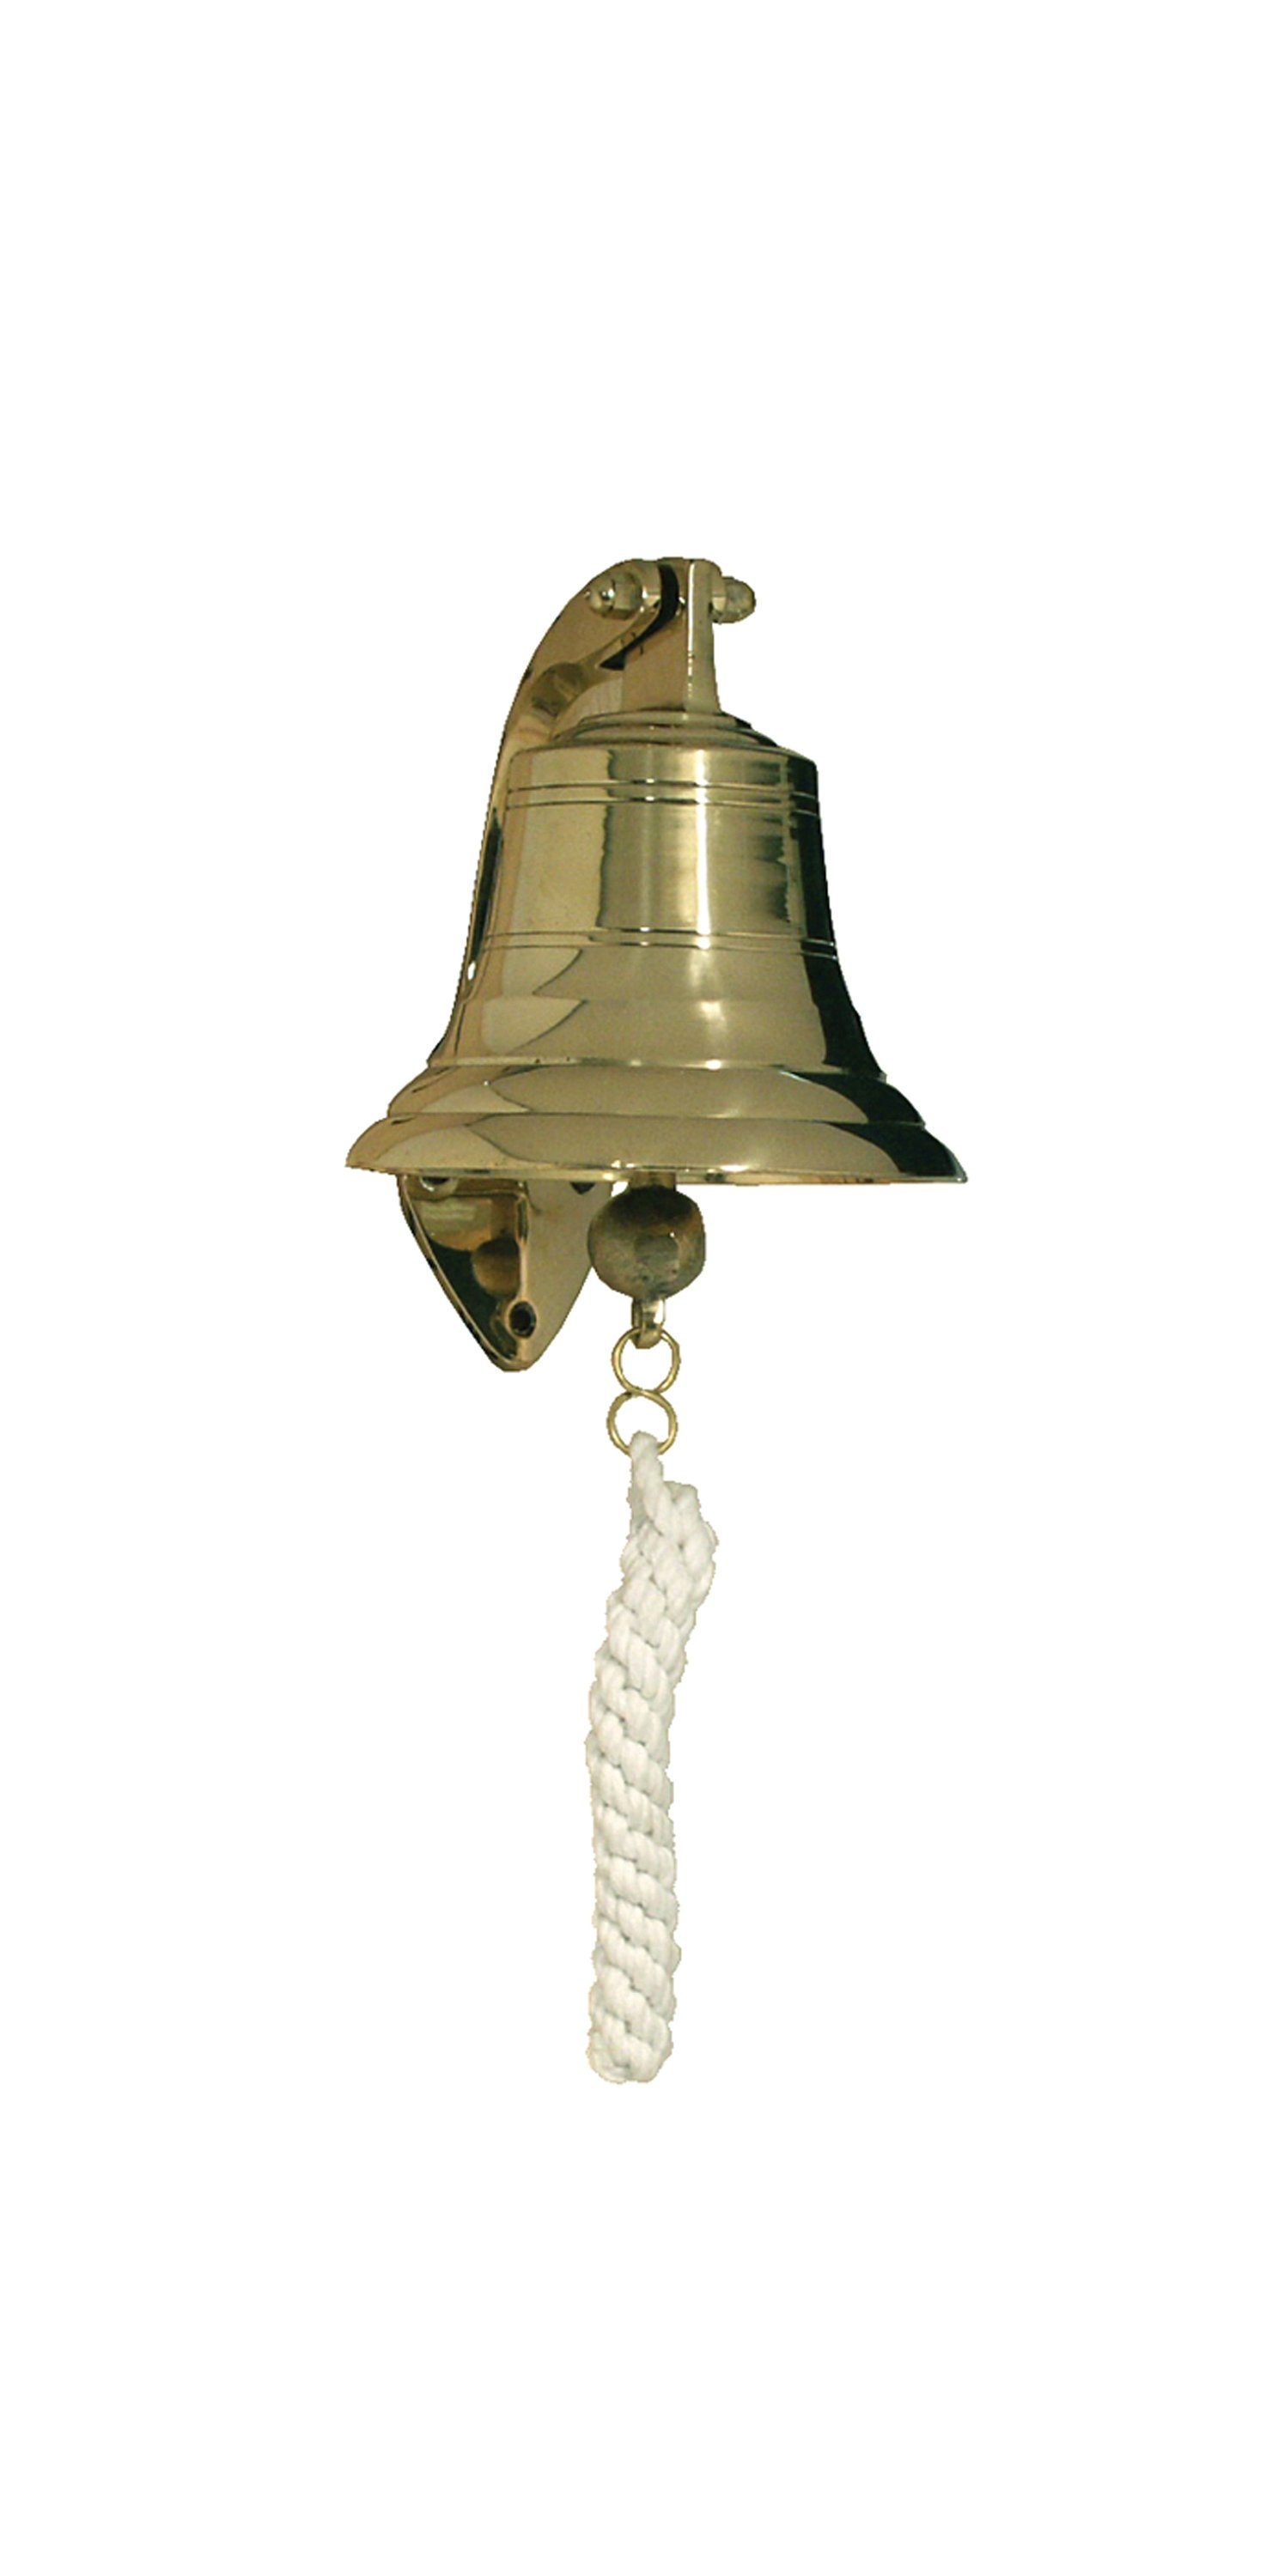 Solid Polished Brass 4 Nautical Ship Bell Replica With Hinged